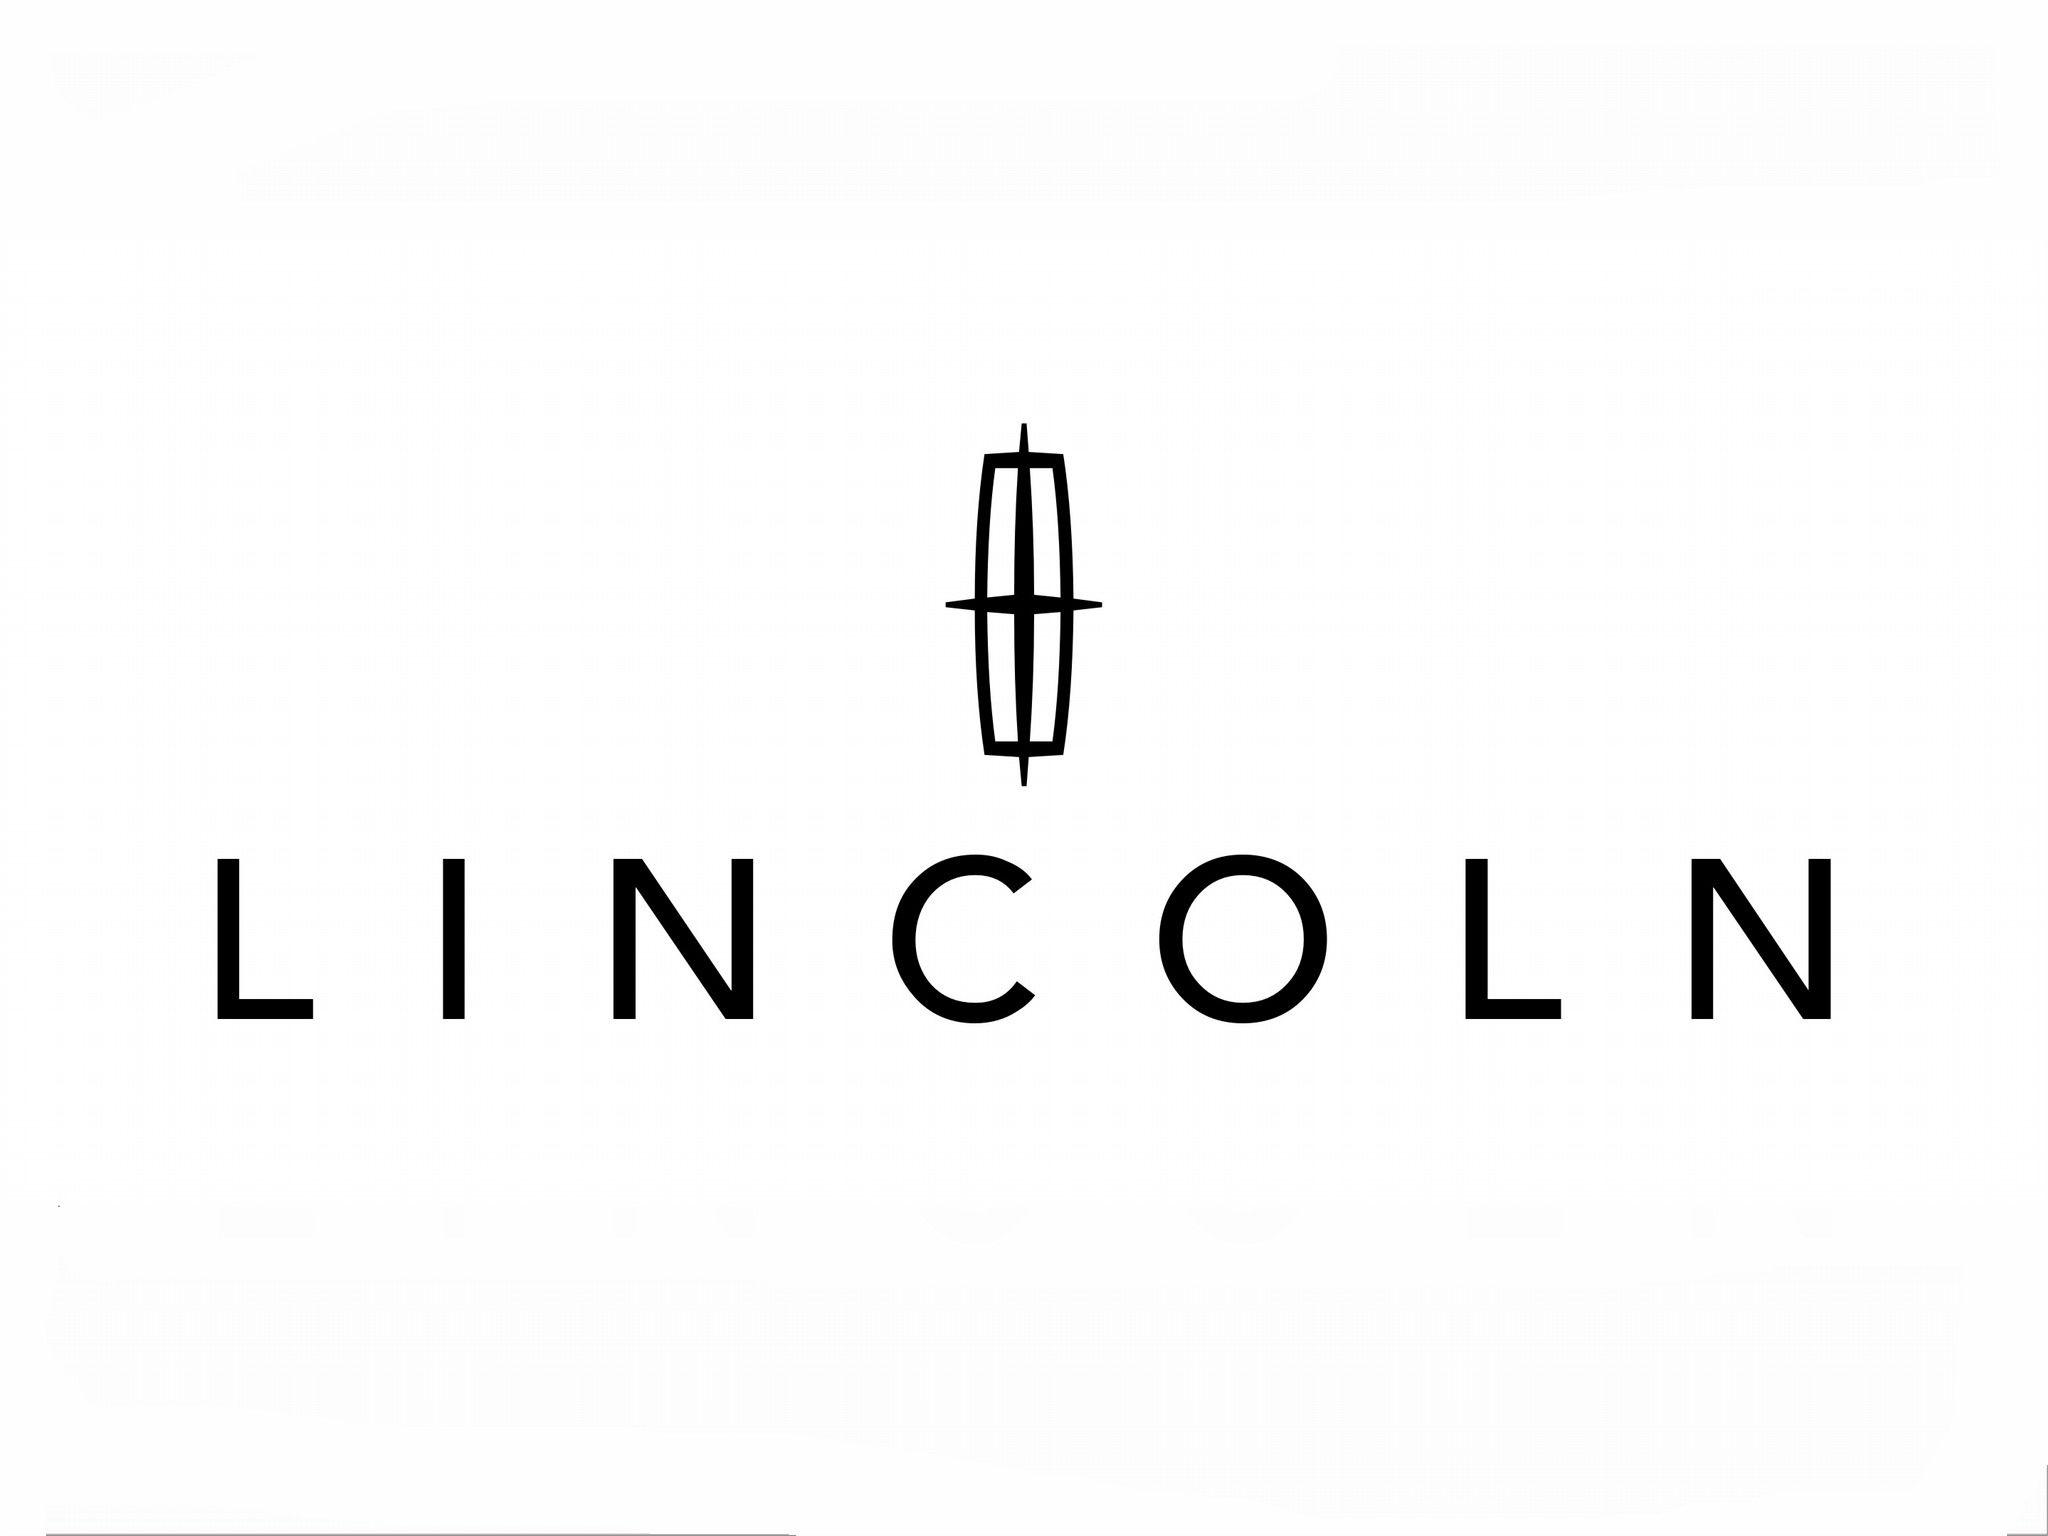 Lincoln Car Logo - Lincoln Logo, Lincoln Car Symbol Meaning and History | Car Brand ...